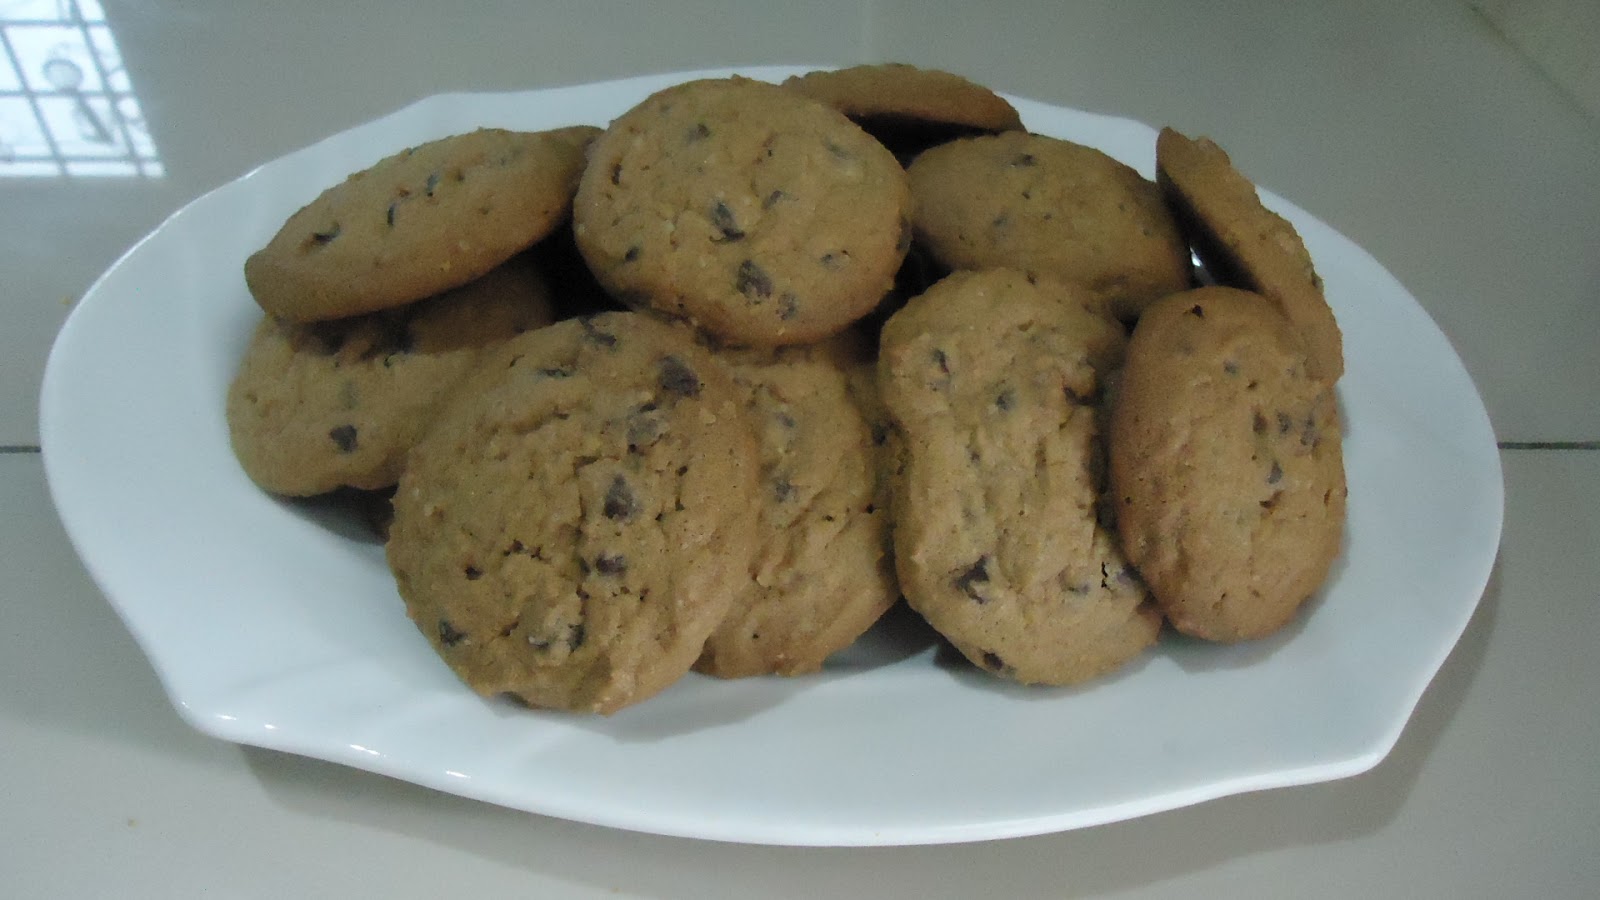 Zara ♥ Baking: ALMOST FAMOUS AMOS COOKIES RECIPES...